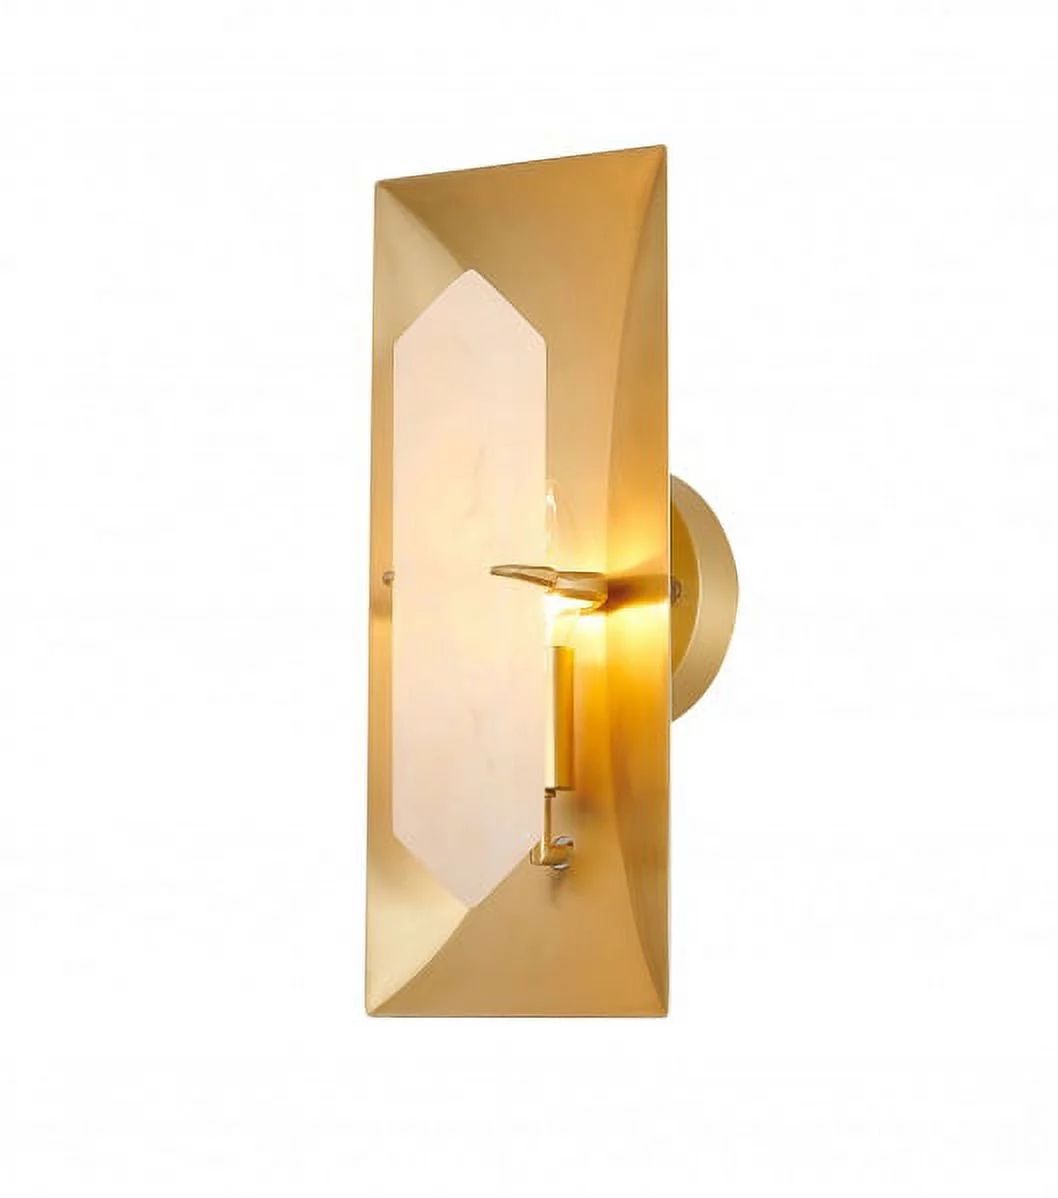 Bethel Copper Metal Frame Wall Sconce With White Alabaster Stone Center | Walmart (US)